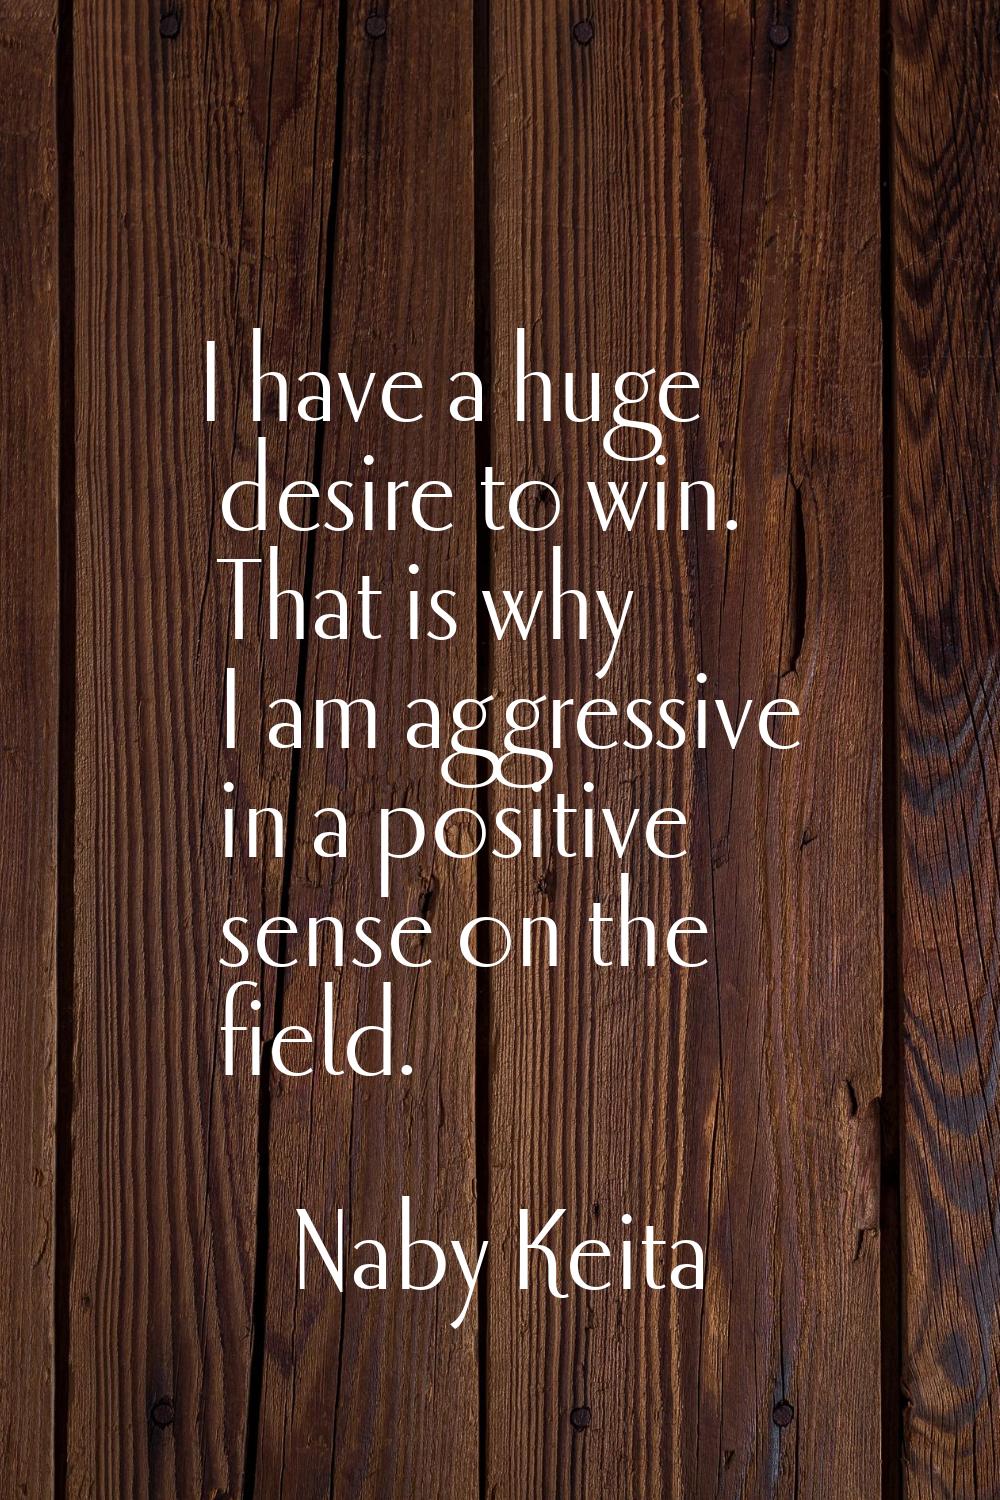 I have a huge desire to win. That is why I am aggressive in a positive sense on the field.